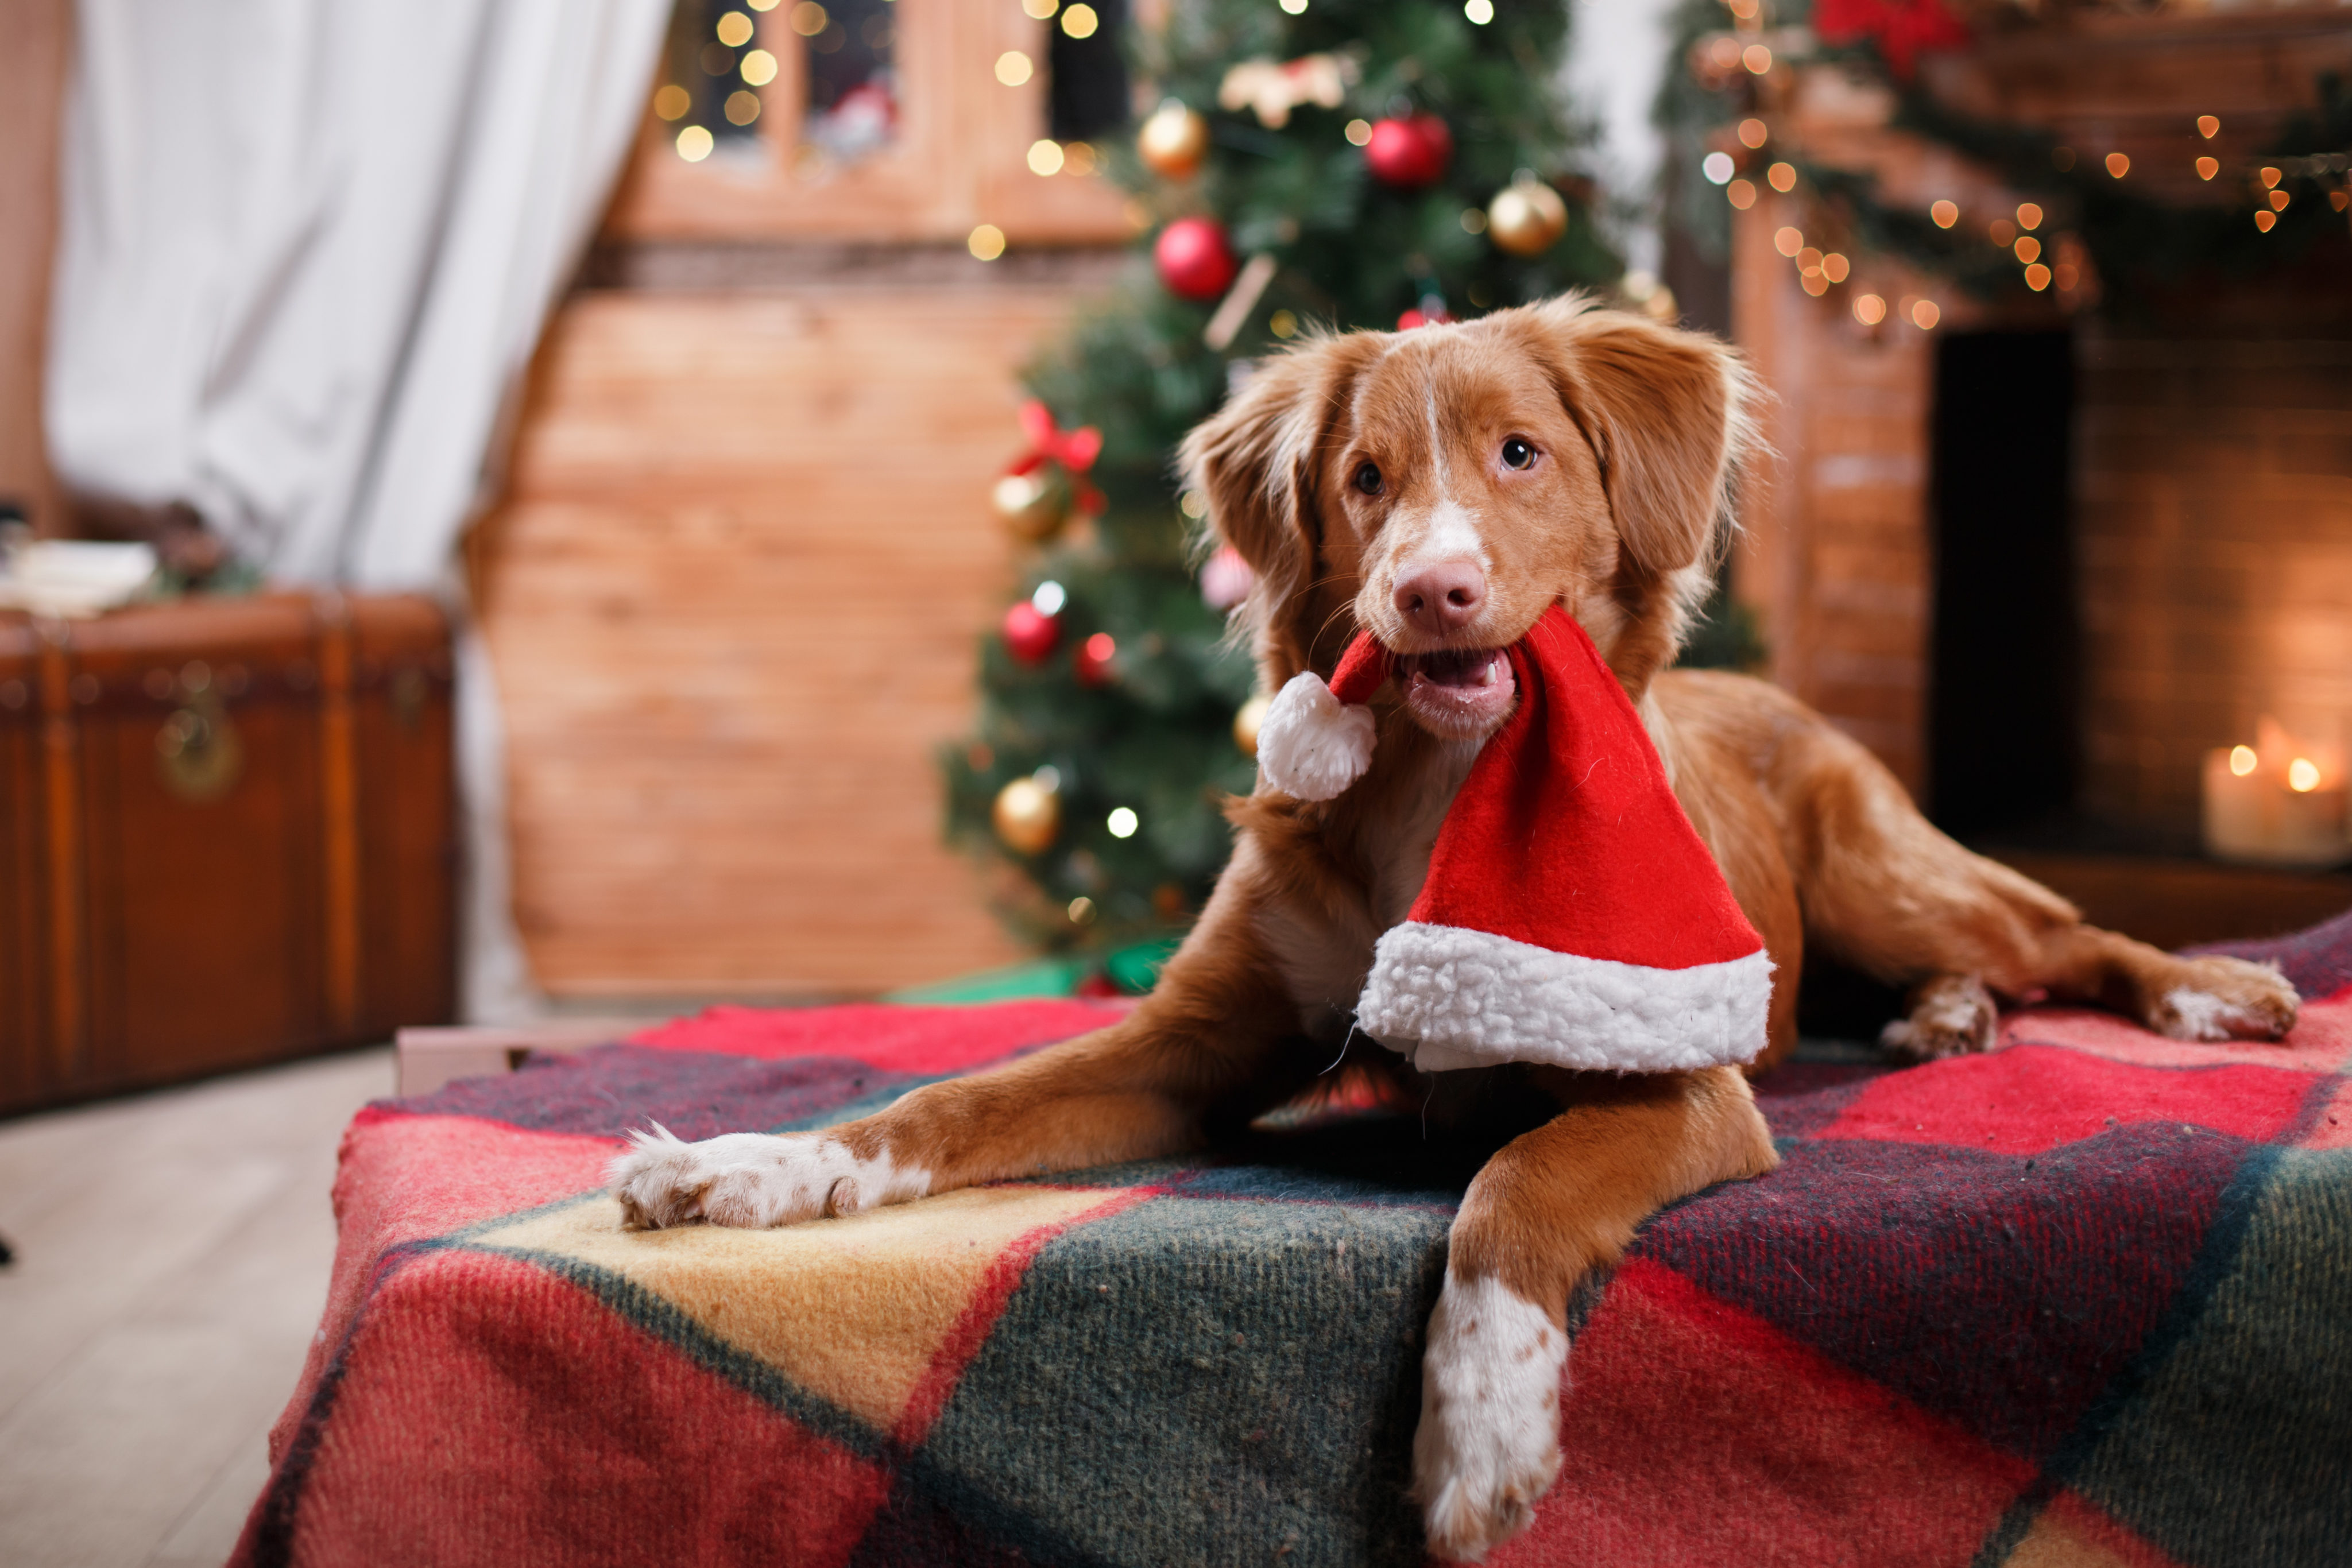 Holiday foods, decorations to keep away from pets WTOP